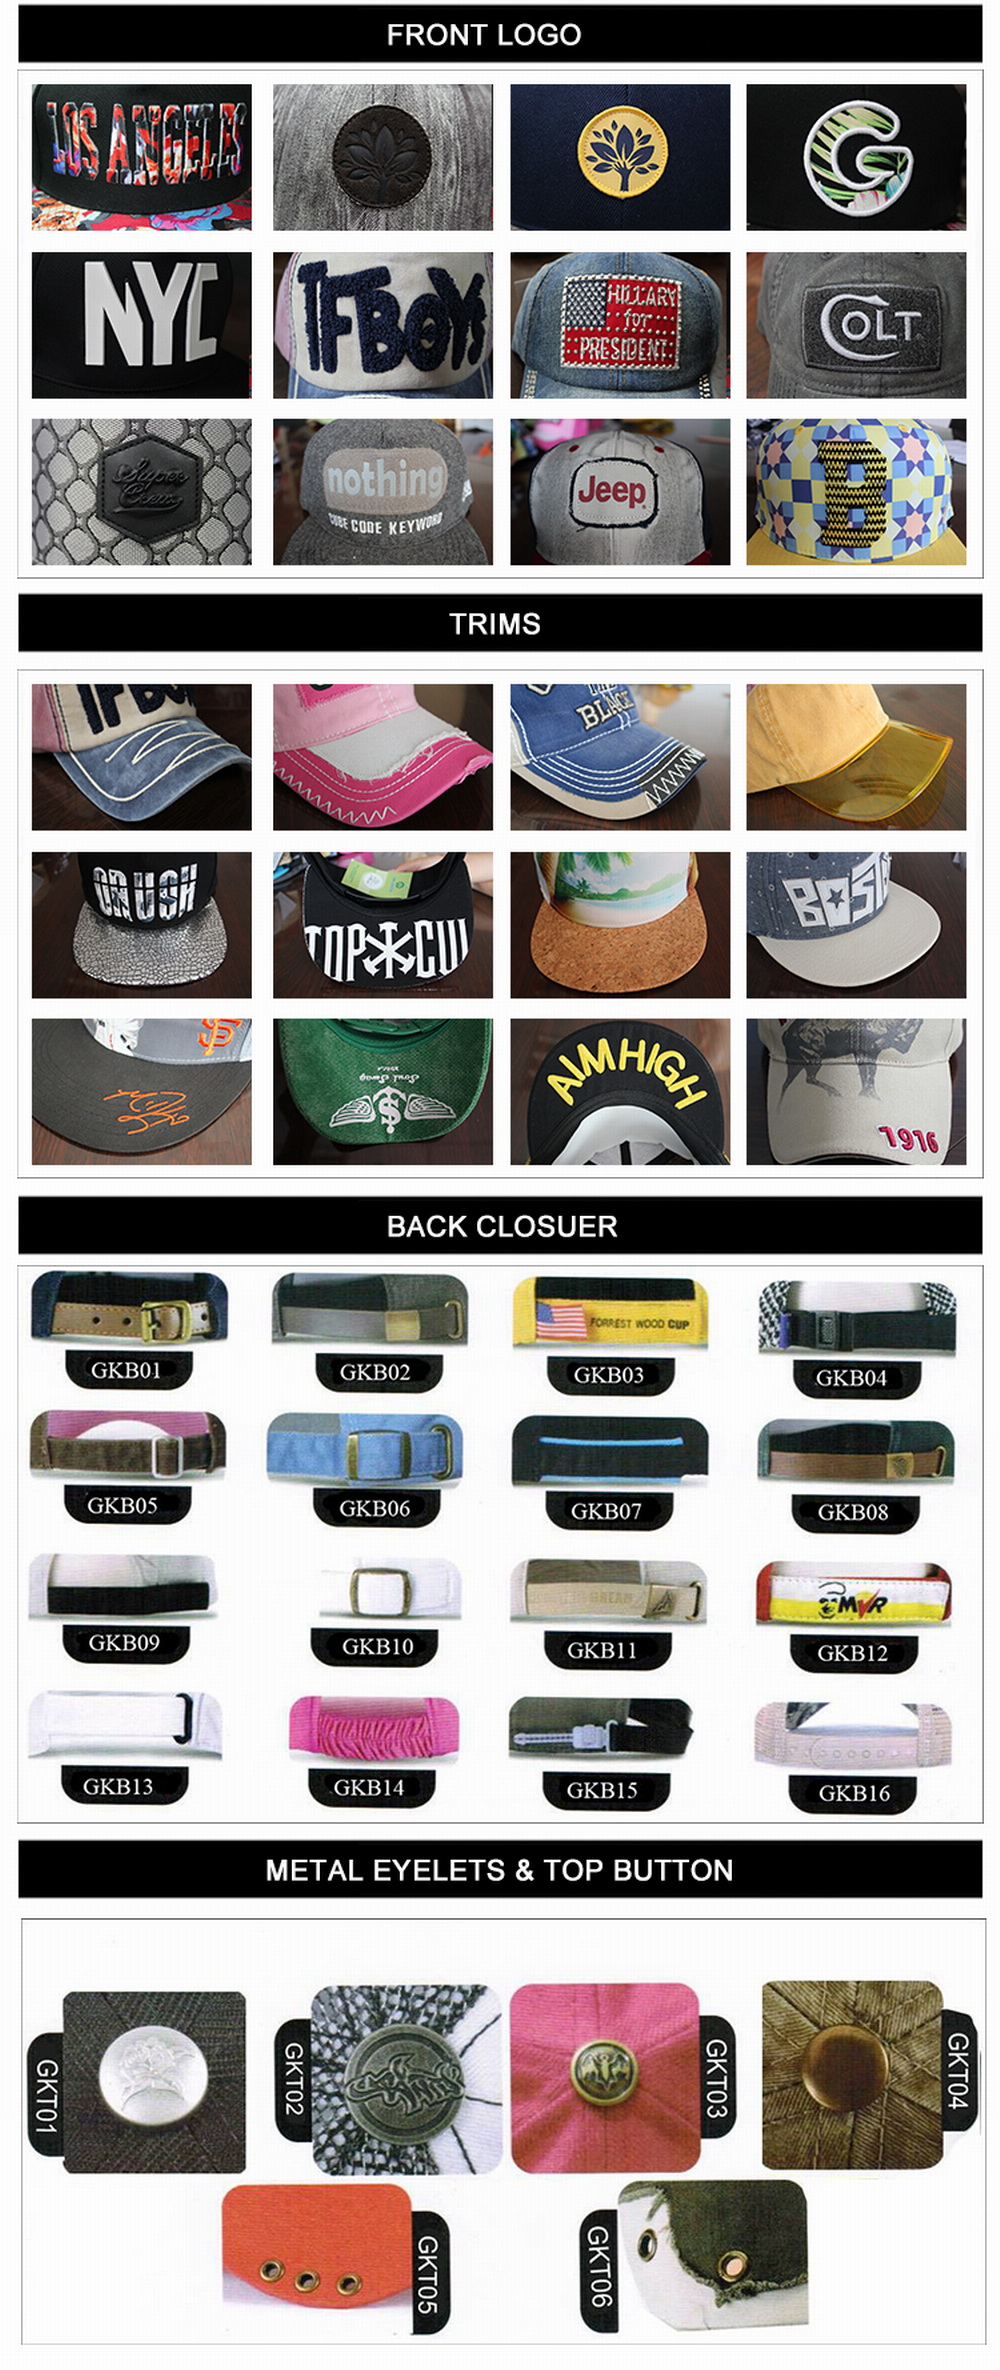 Hats and Caps Product details 01